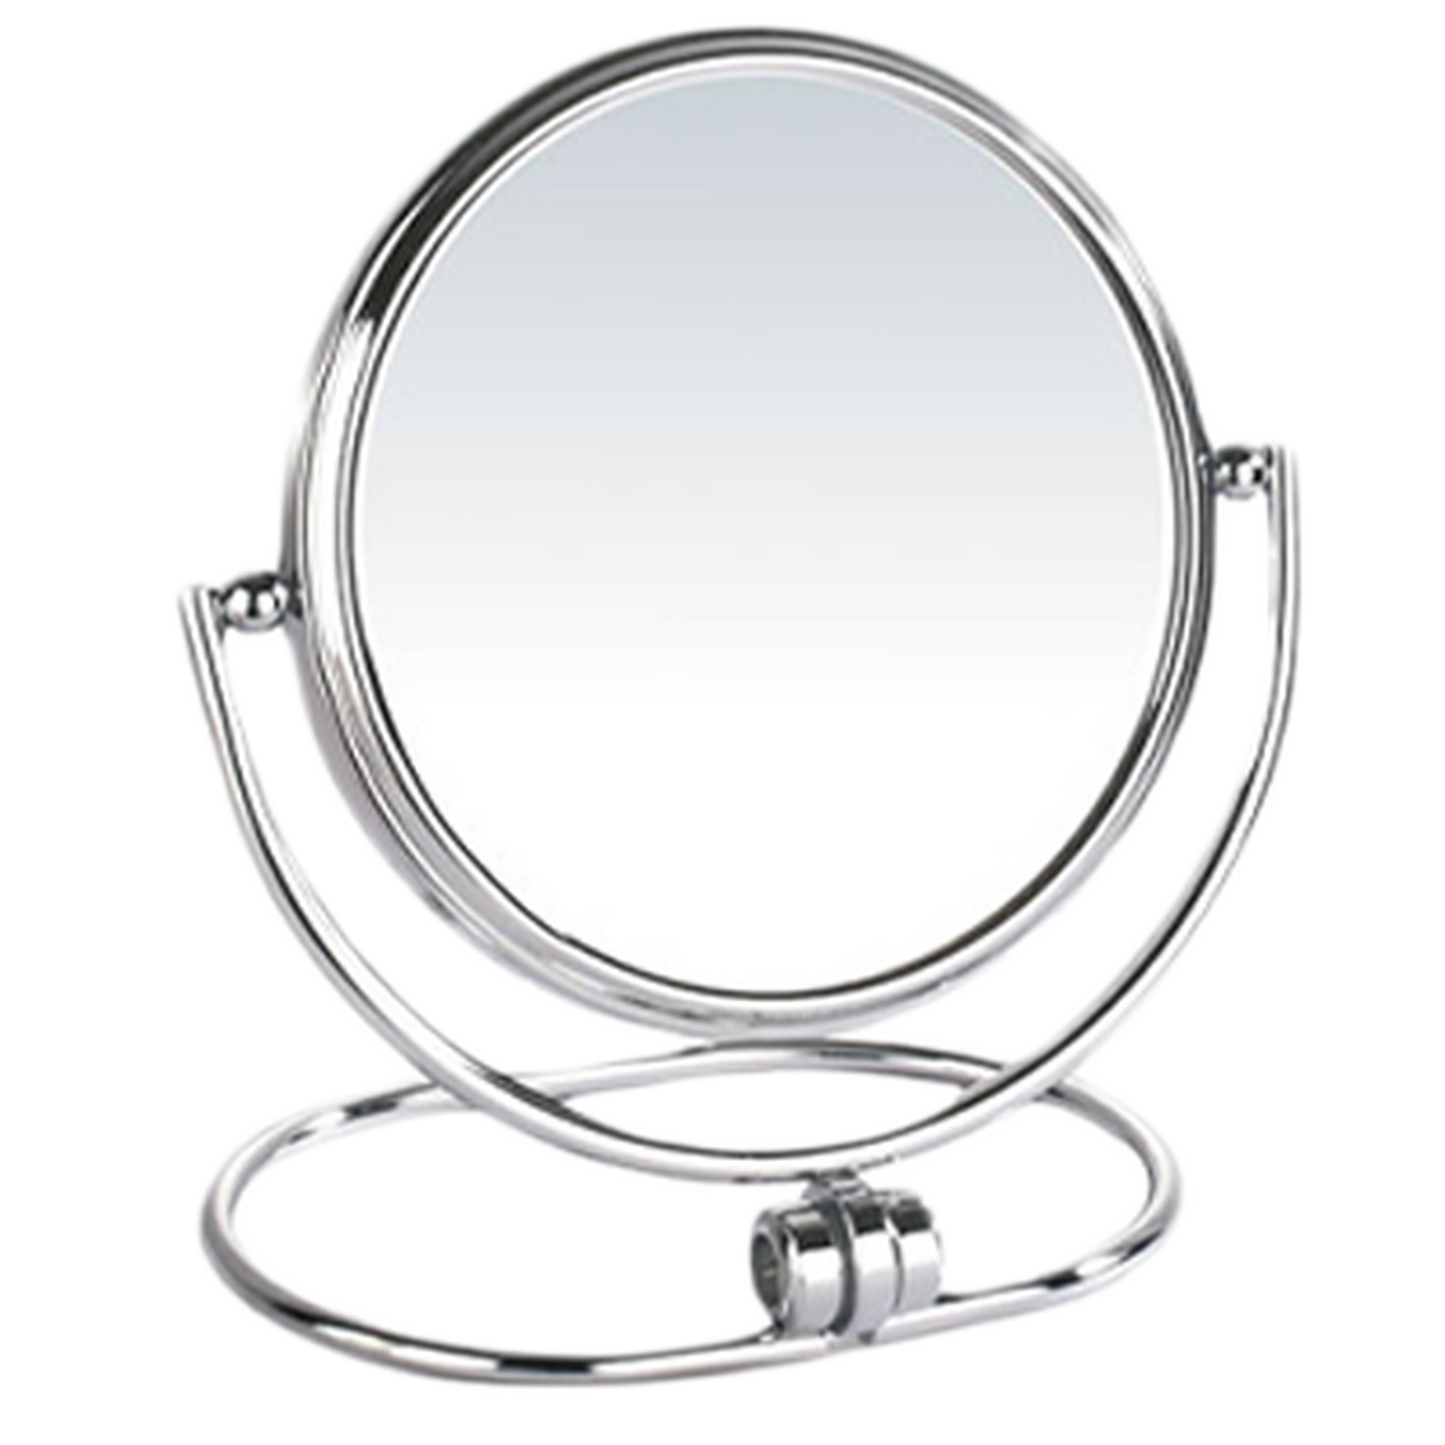 Afina 6" Polished Chrome 5X Magnification Round Double Sided Table Top Makeup Mirror